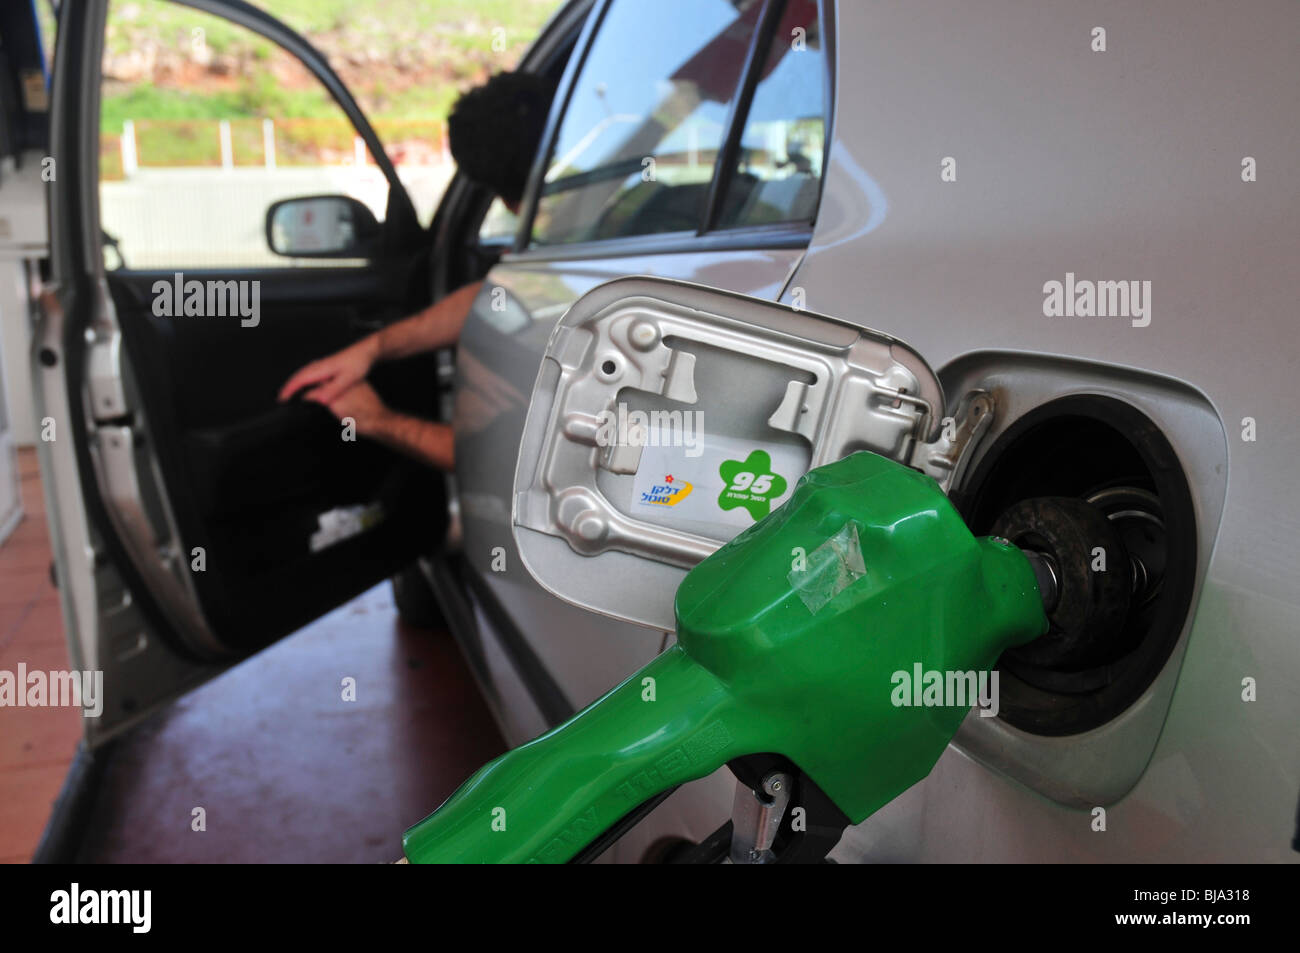 filling up unleaded petrol at a petrol station Stock Photo